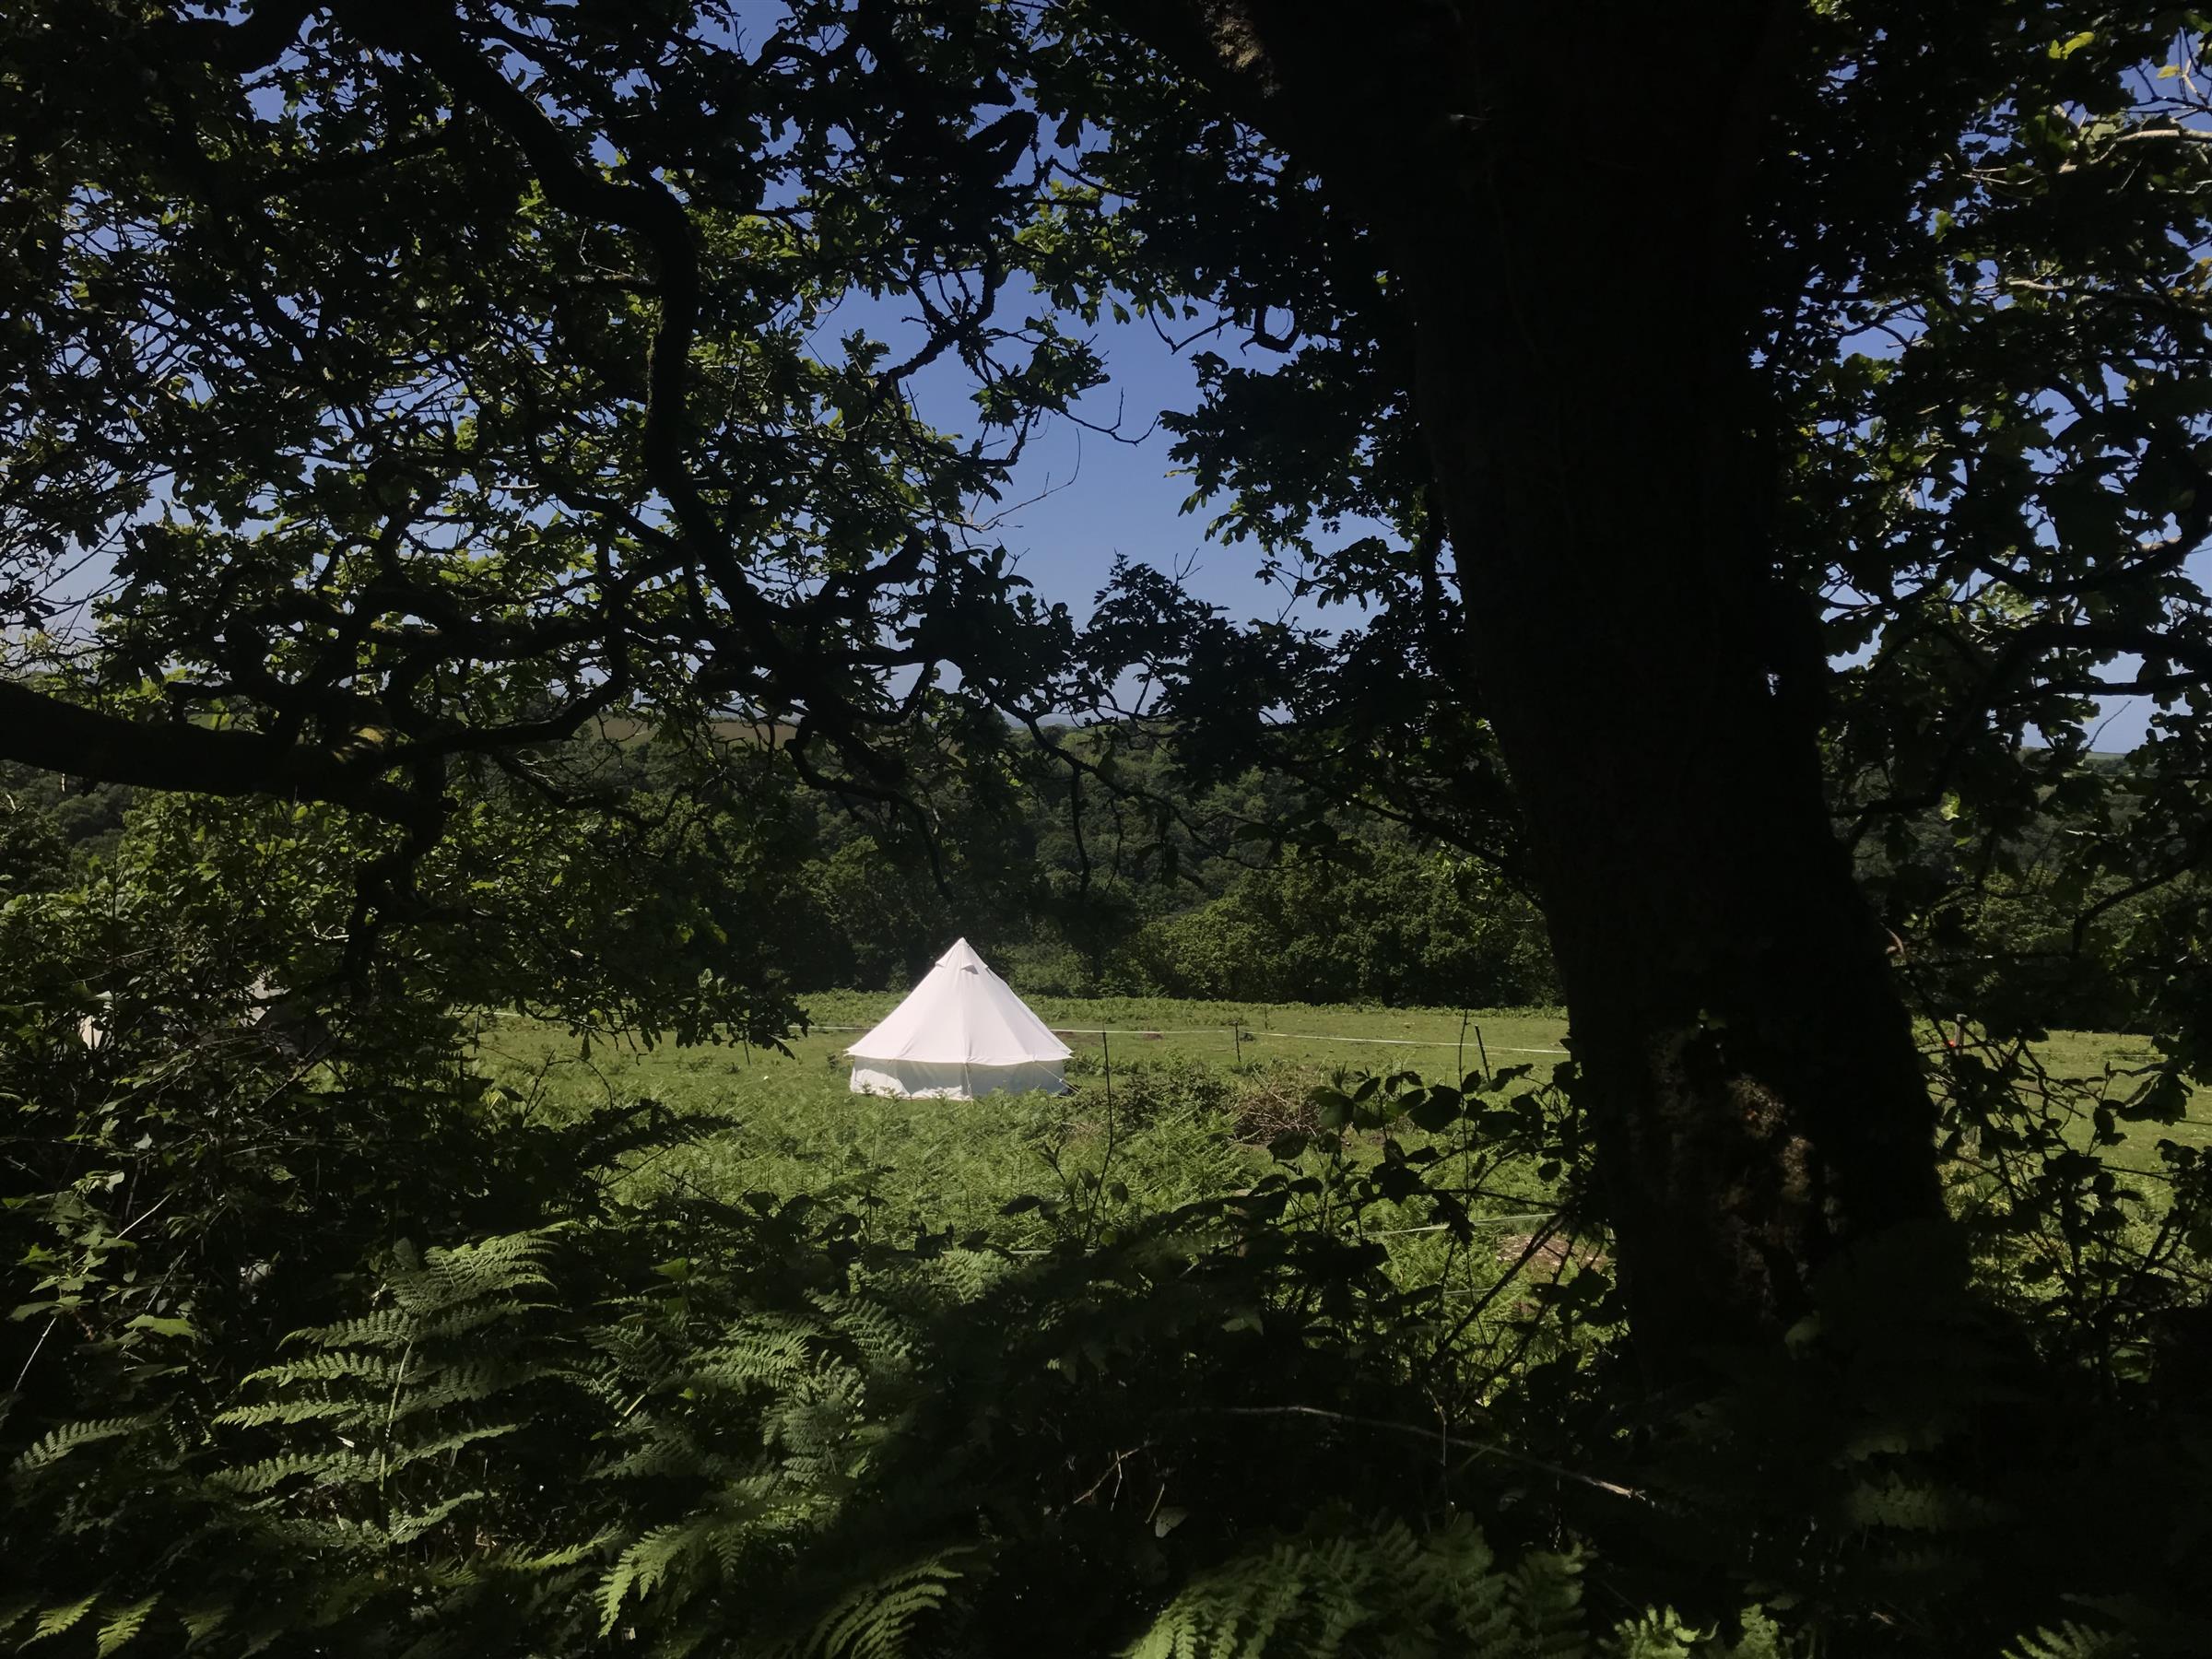 Bell tents are available to rent for extra space